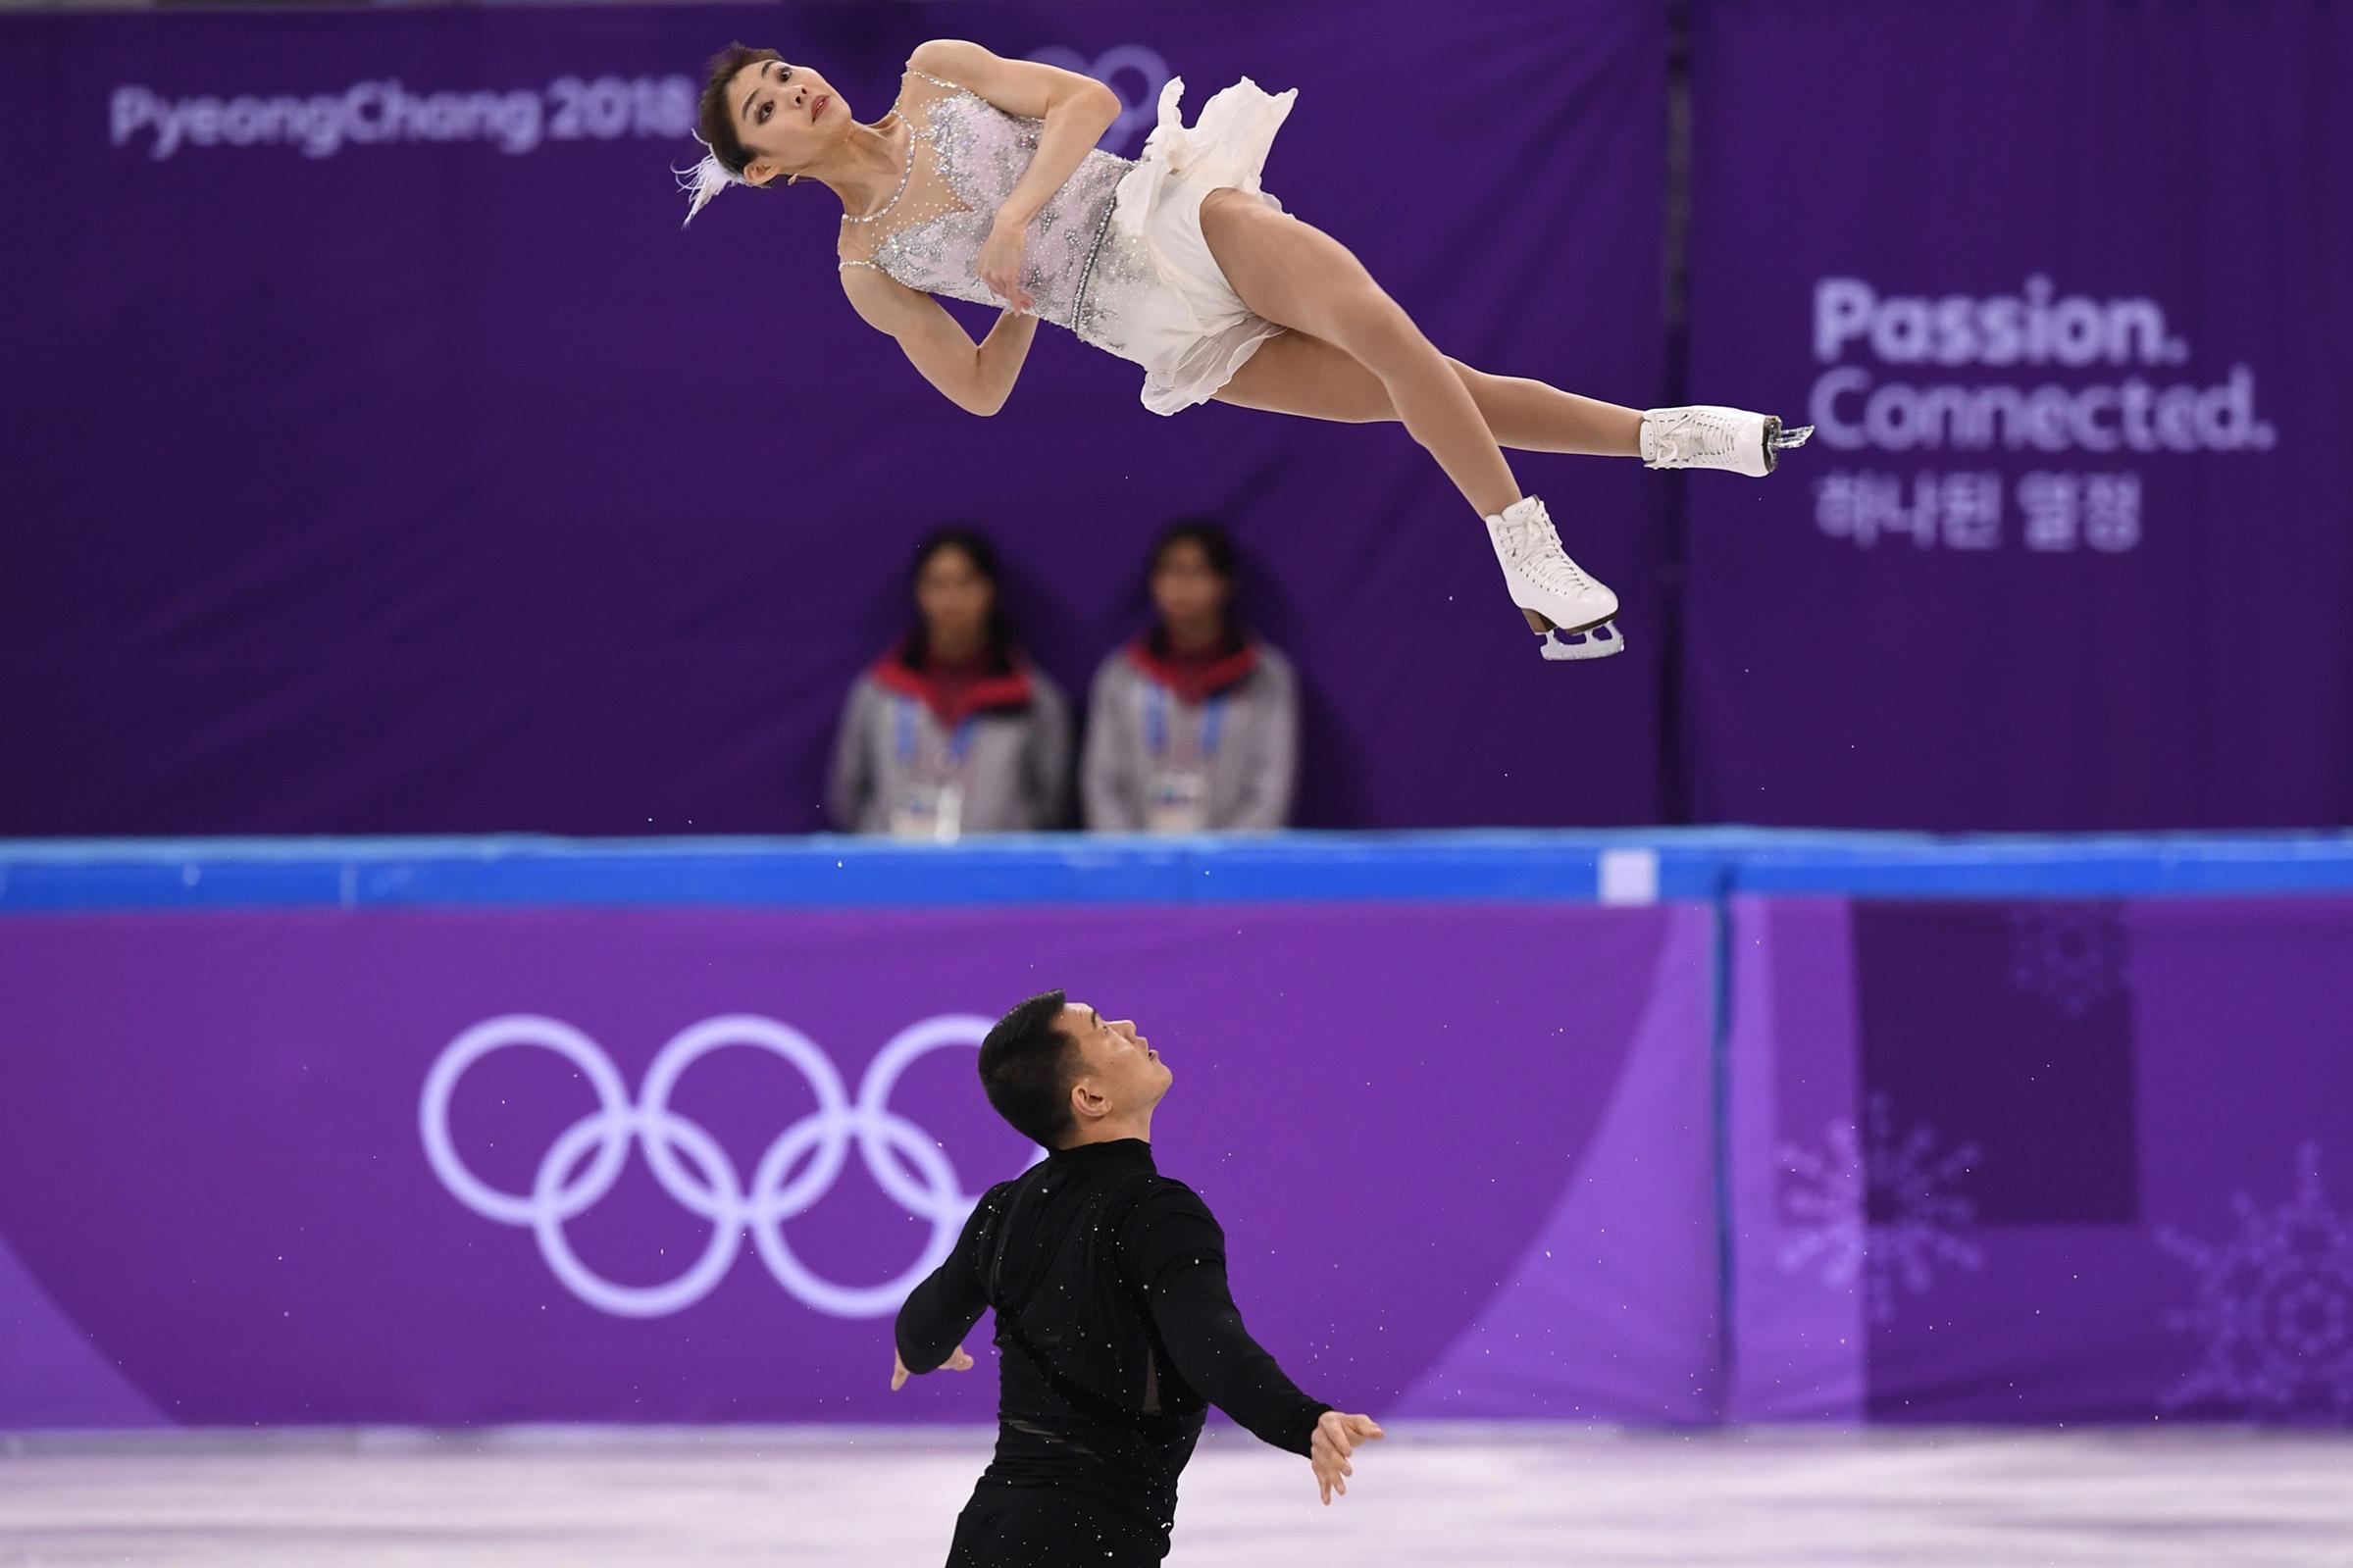 China's Yu Xiaoyu and Zhang Hao compete in the pair skating short program of the figure skating event during the Pyeongchang 2018 Winter Olympic Games at the Gangneung Ice Arena in Gangneung on Feb. 14, 2018.